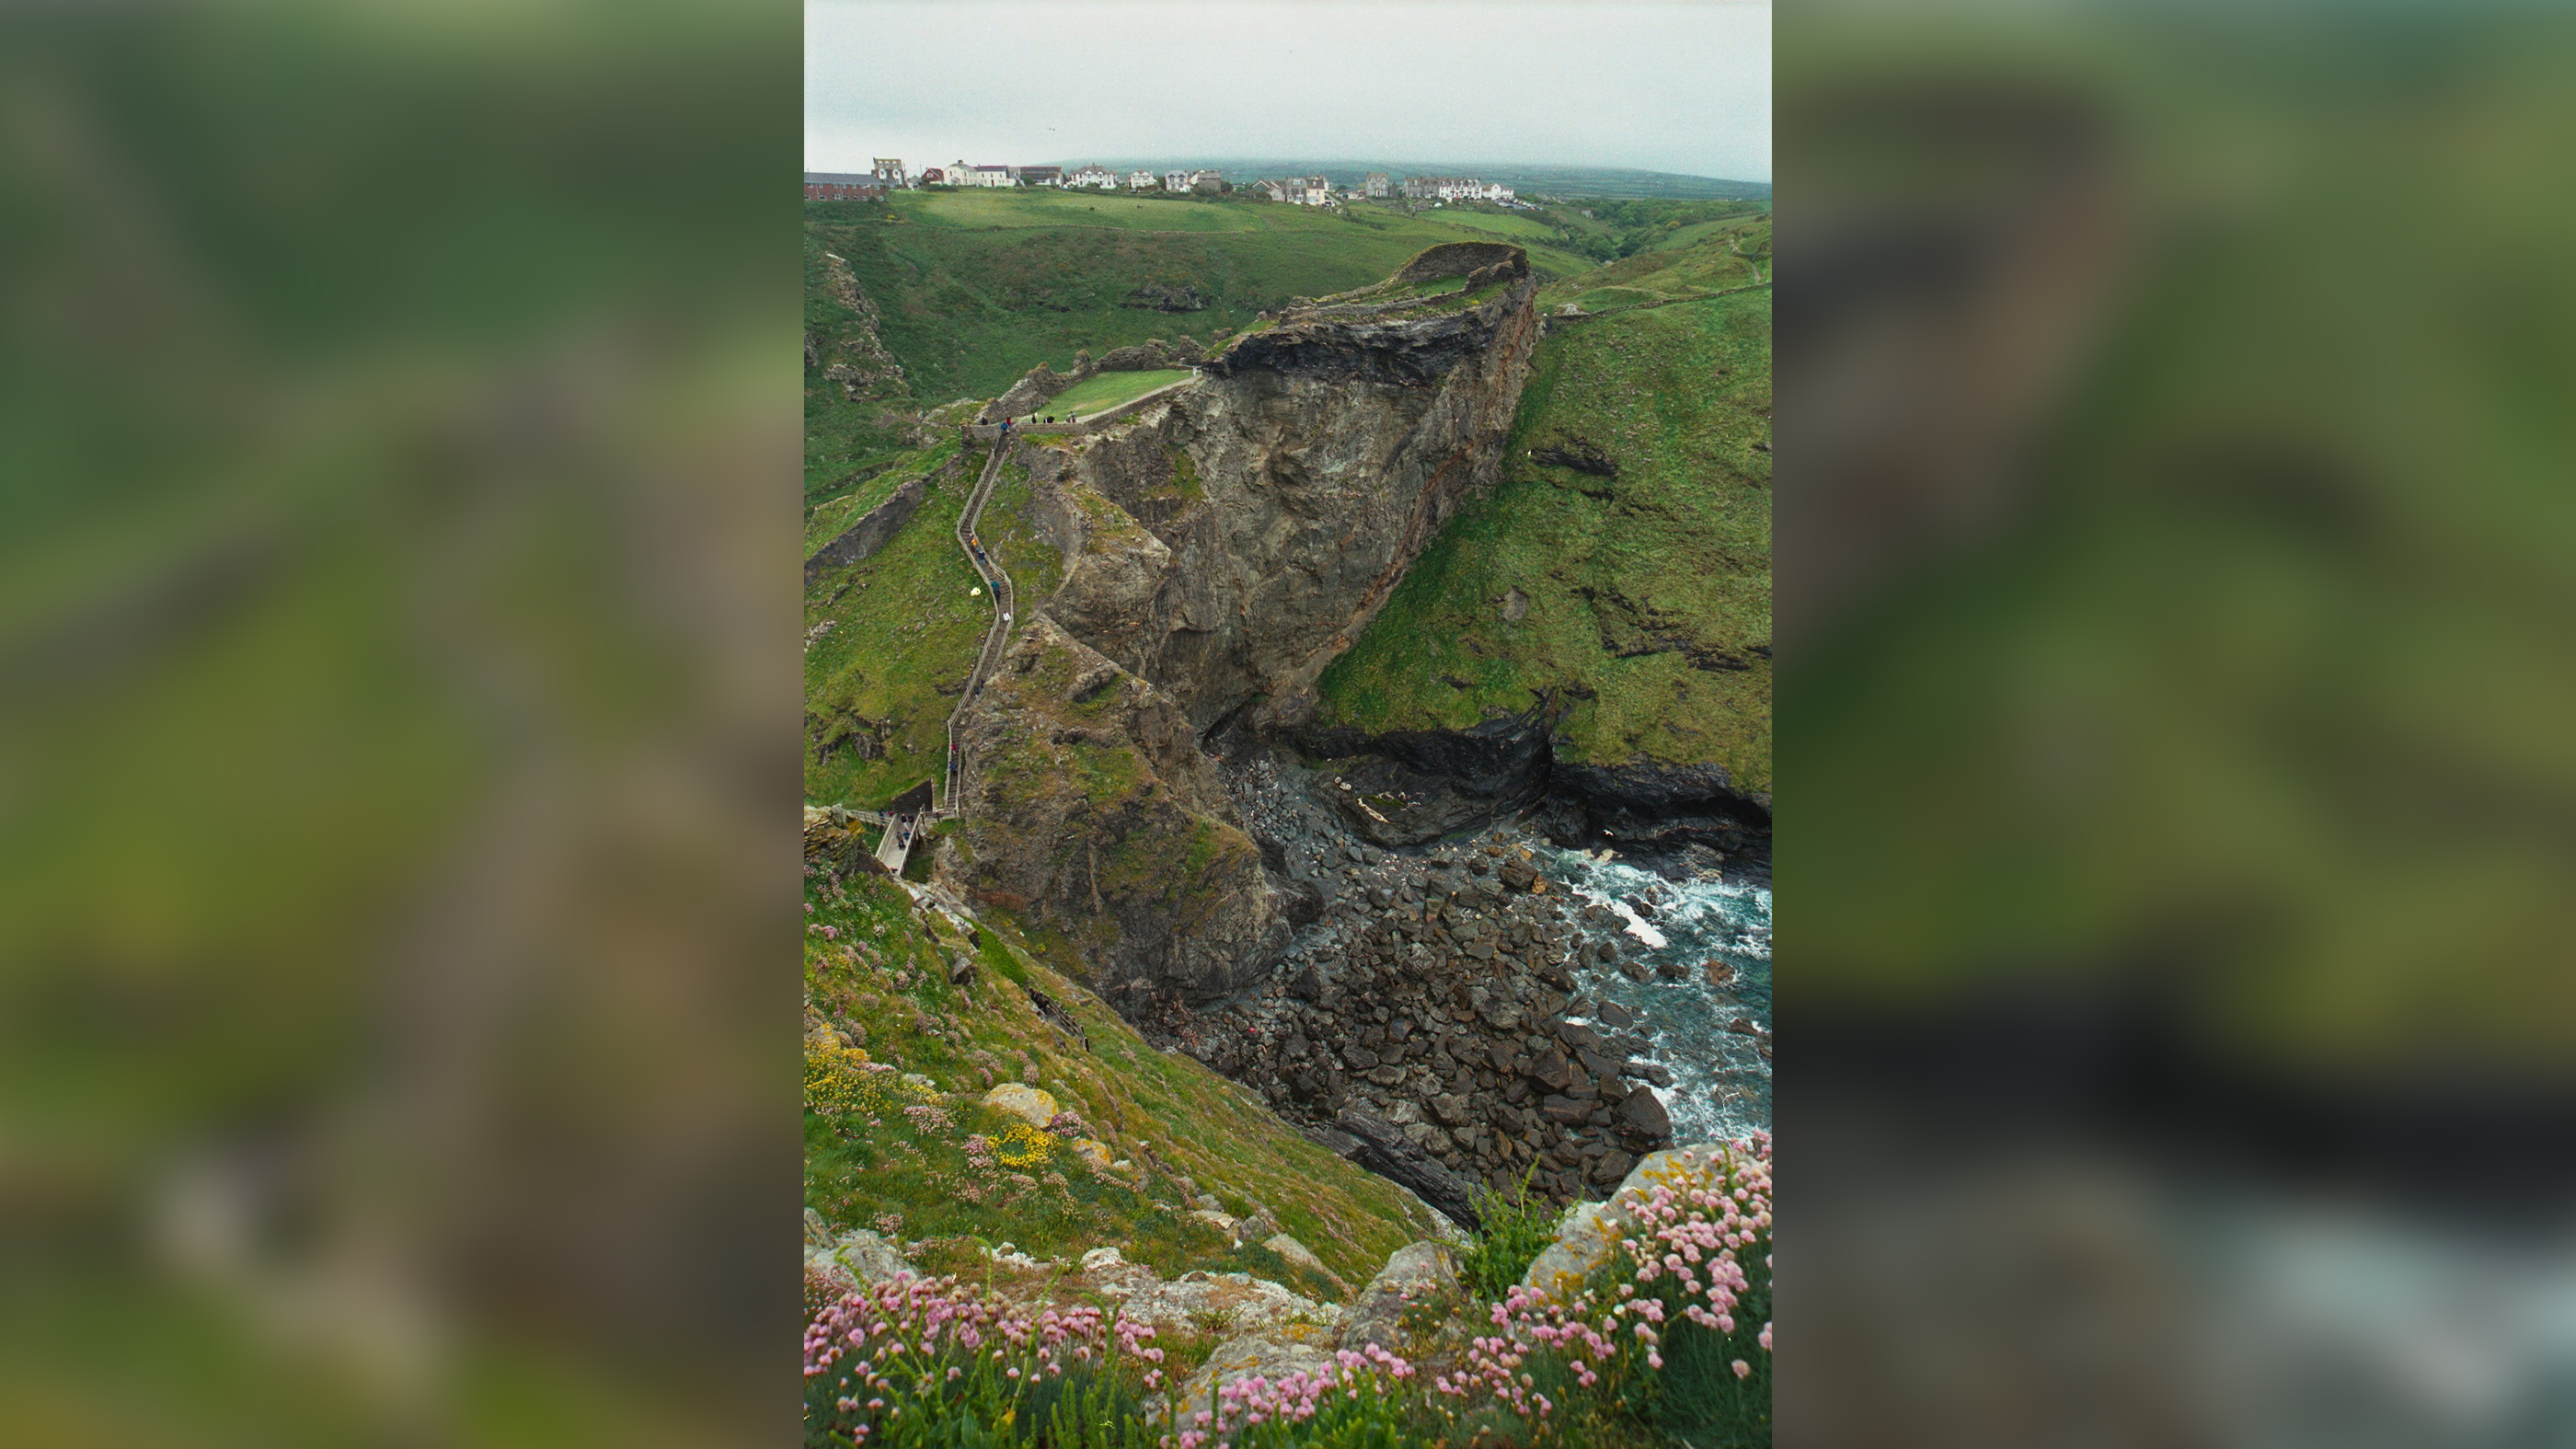 Graves thought to be of British kings, covered with mounds of earth, were also found at Tintagel on the coast of Cornwall – a site long associated with British royalty, and especially some legends of King Arthur.